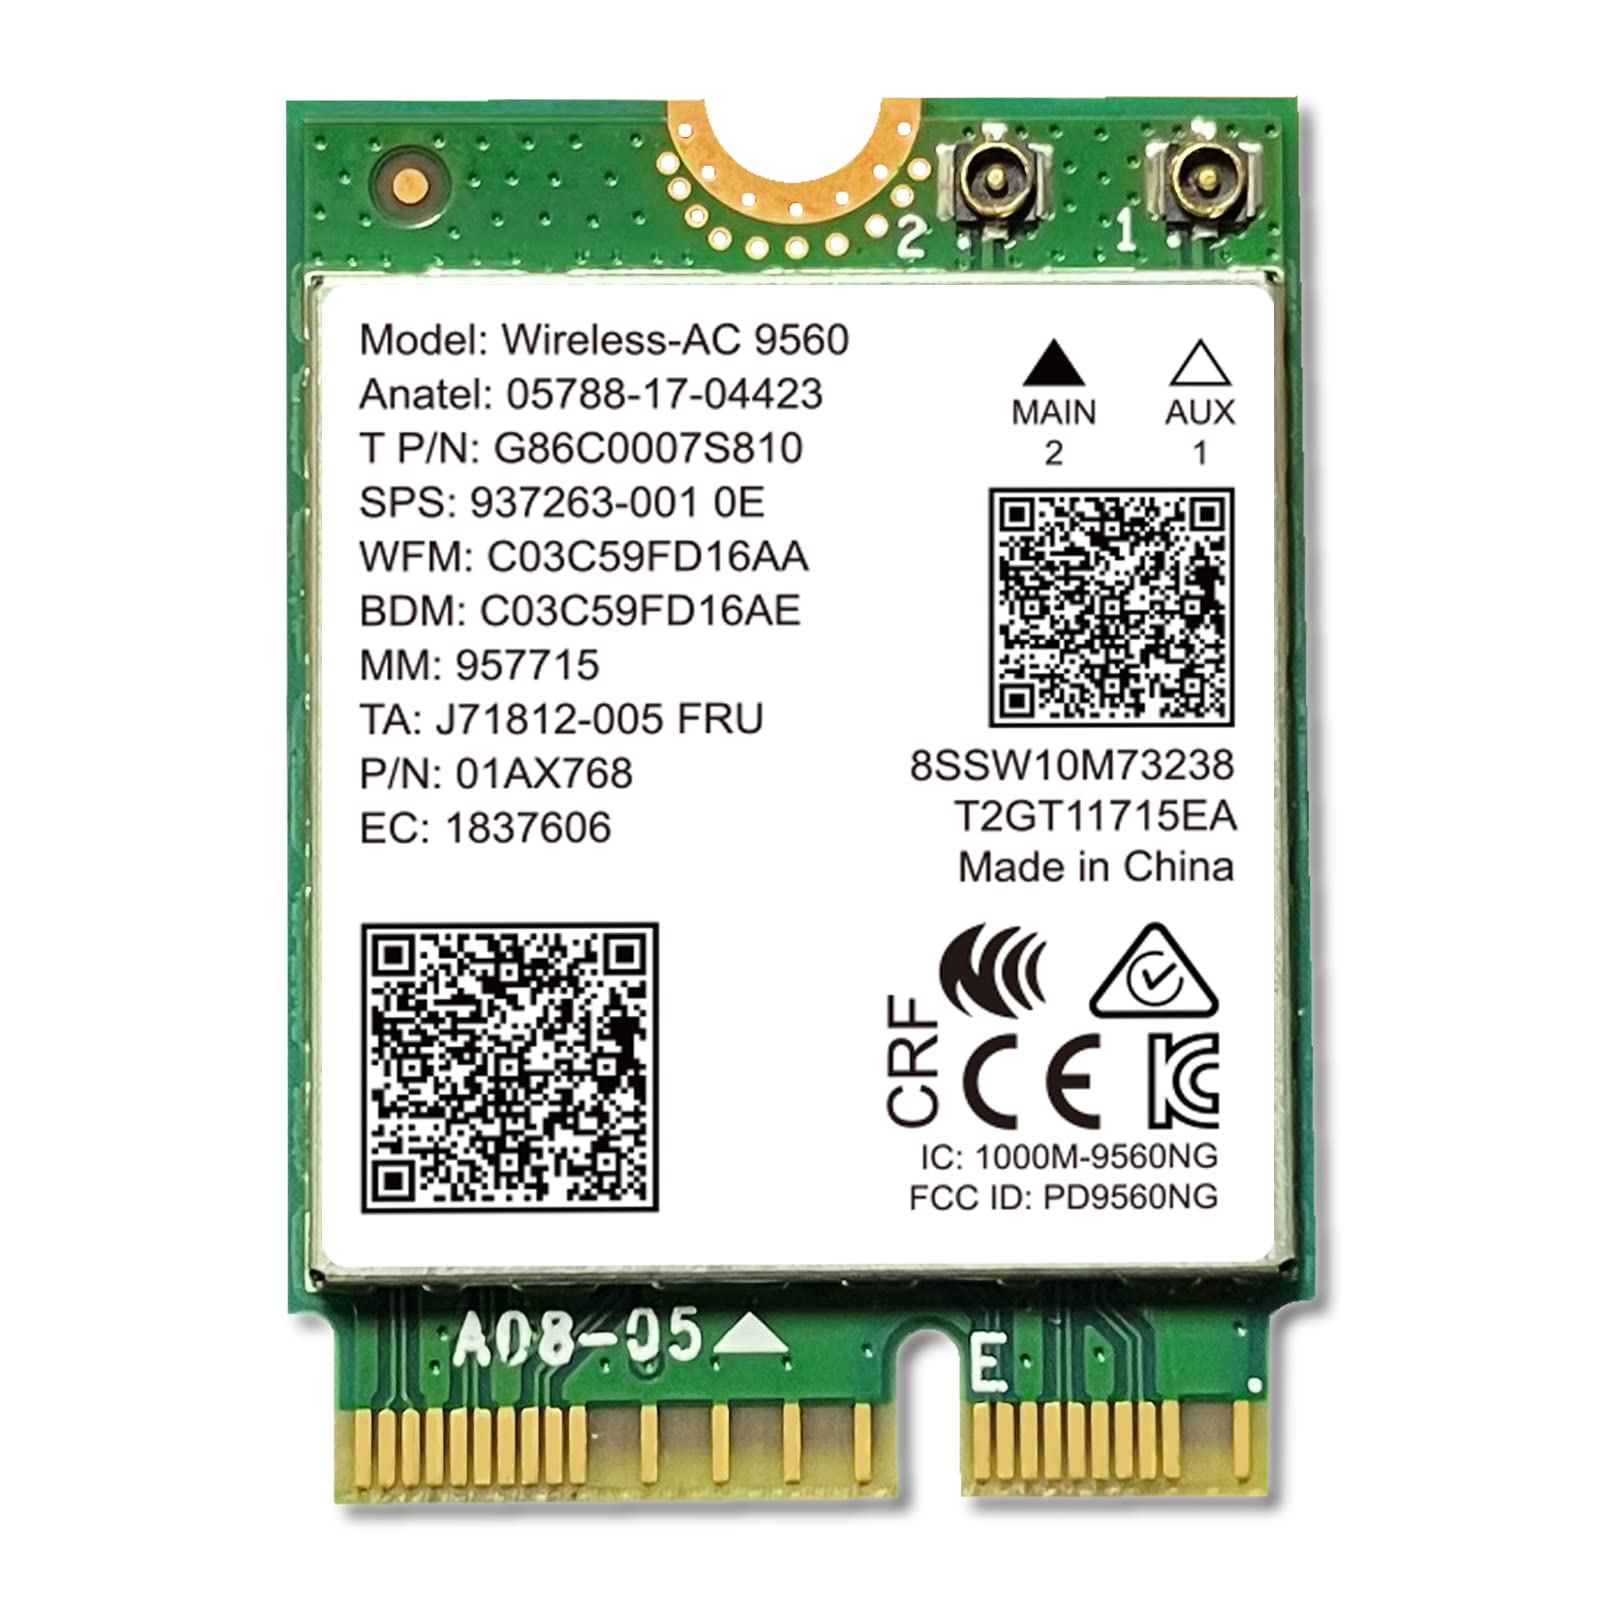 NETELY Wireless-AC 9560NGW NGFF M2 CNVI Interface CRF WiFi Adapter-Wireless-AC 2030Mbps (2.4GHz 300Mbps & 5GHz 160MHz 1730Mbps), Bluetooth 5.0, Intel Wireless-AC 9560NGW (Wireless-AC 9560NGW)